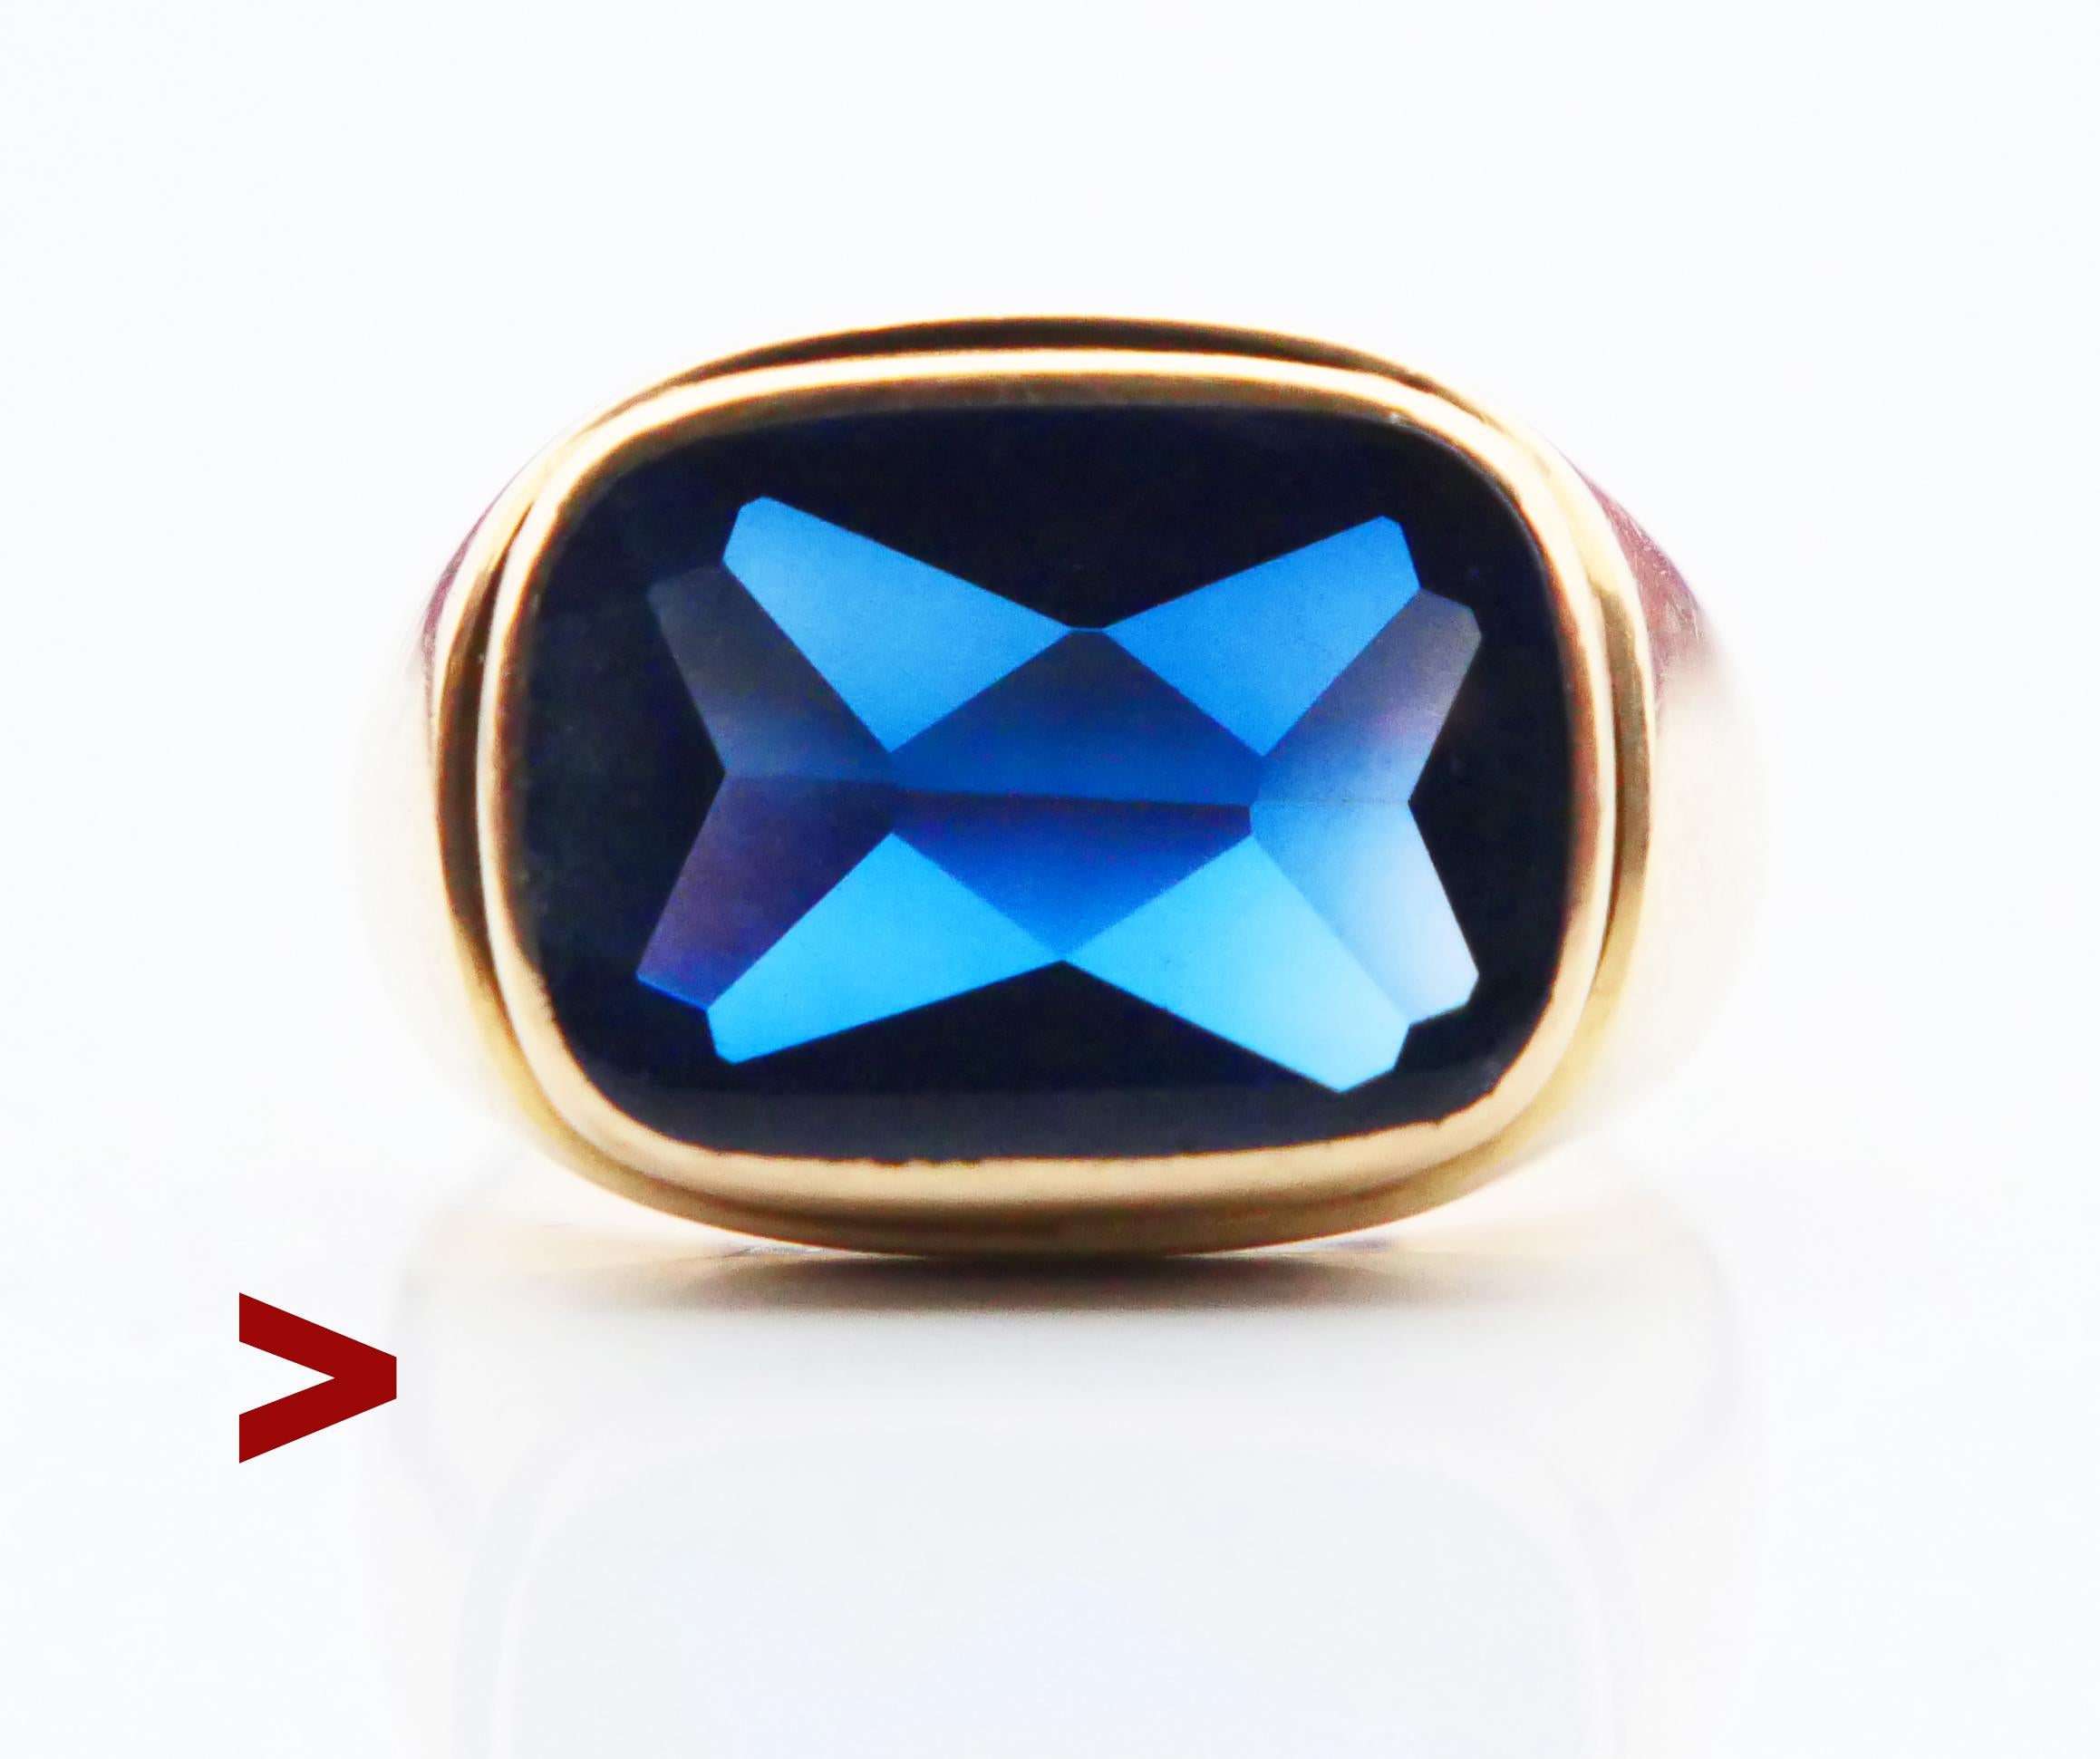 Ring for Men adorned with bezel set Blue Sapphire stone (lab made), a bit convex shaped with polished face and intricately faceted back sides measuring 15 mm x 11 mm.

Stone is dark Blue, it may look differently under various types of light. This